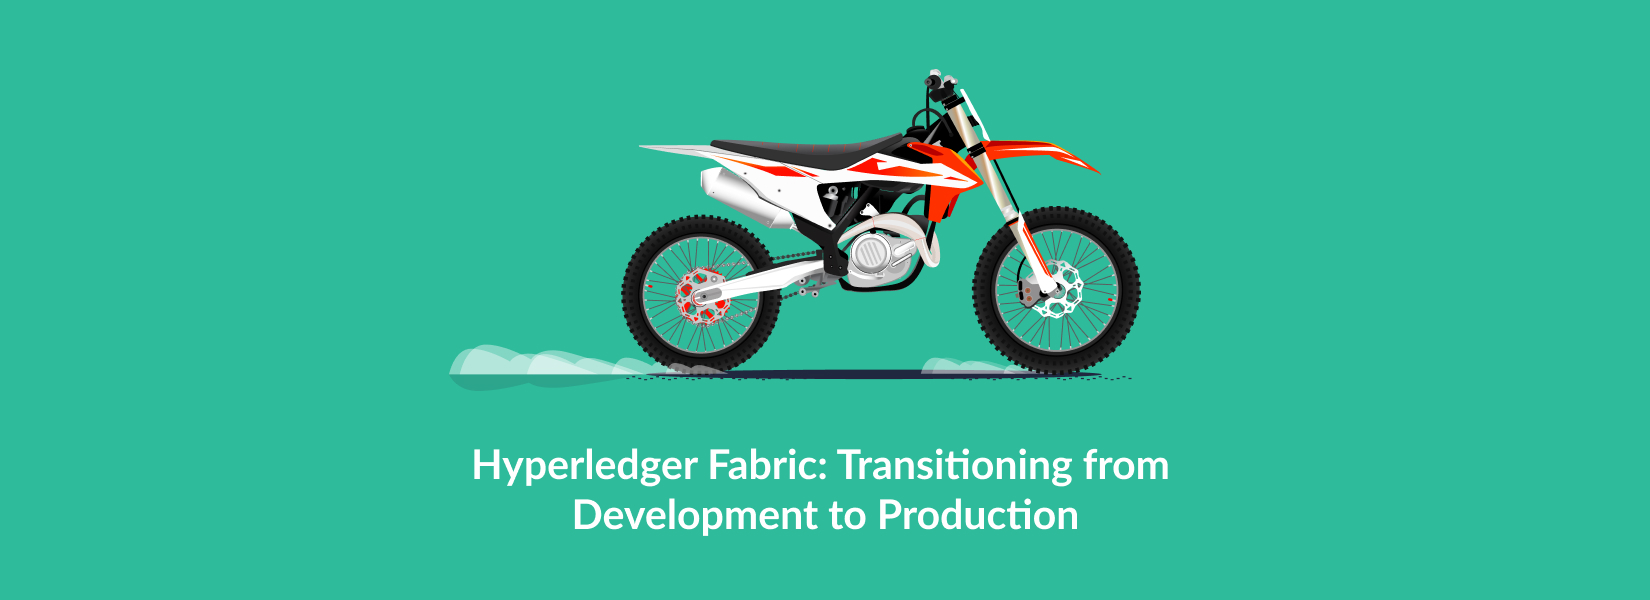 Hyperledger Fabric: Transitioning from Development to Production